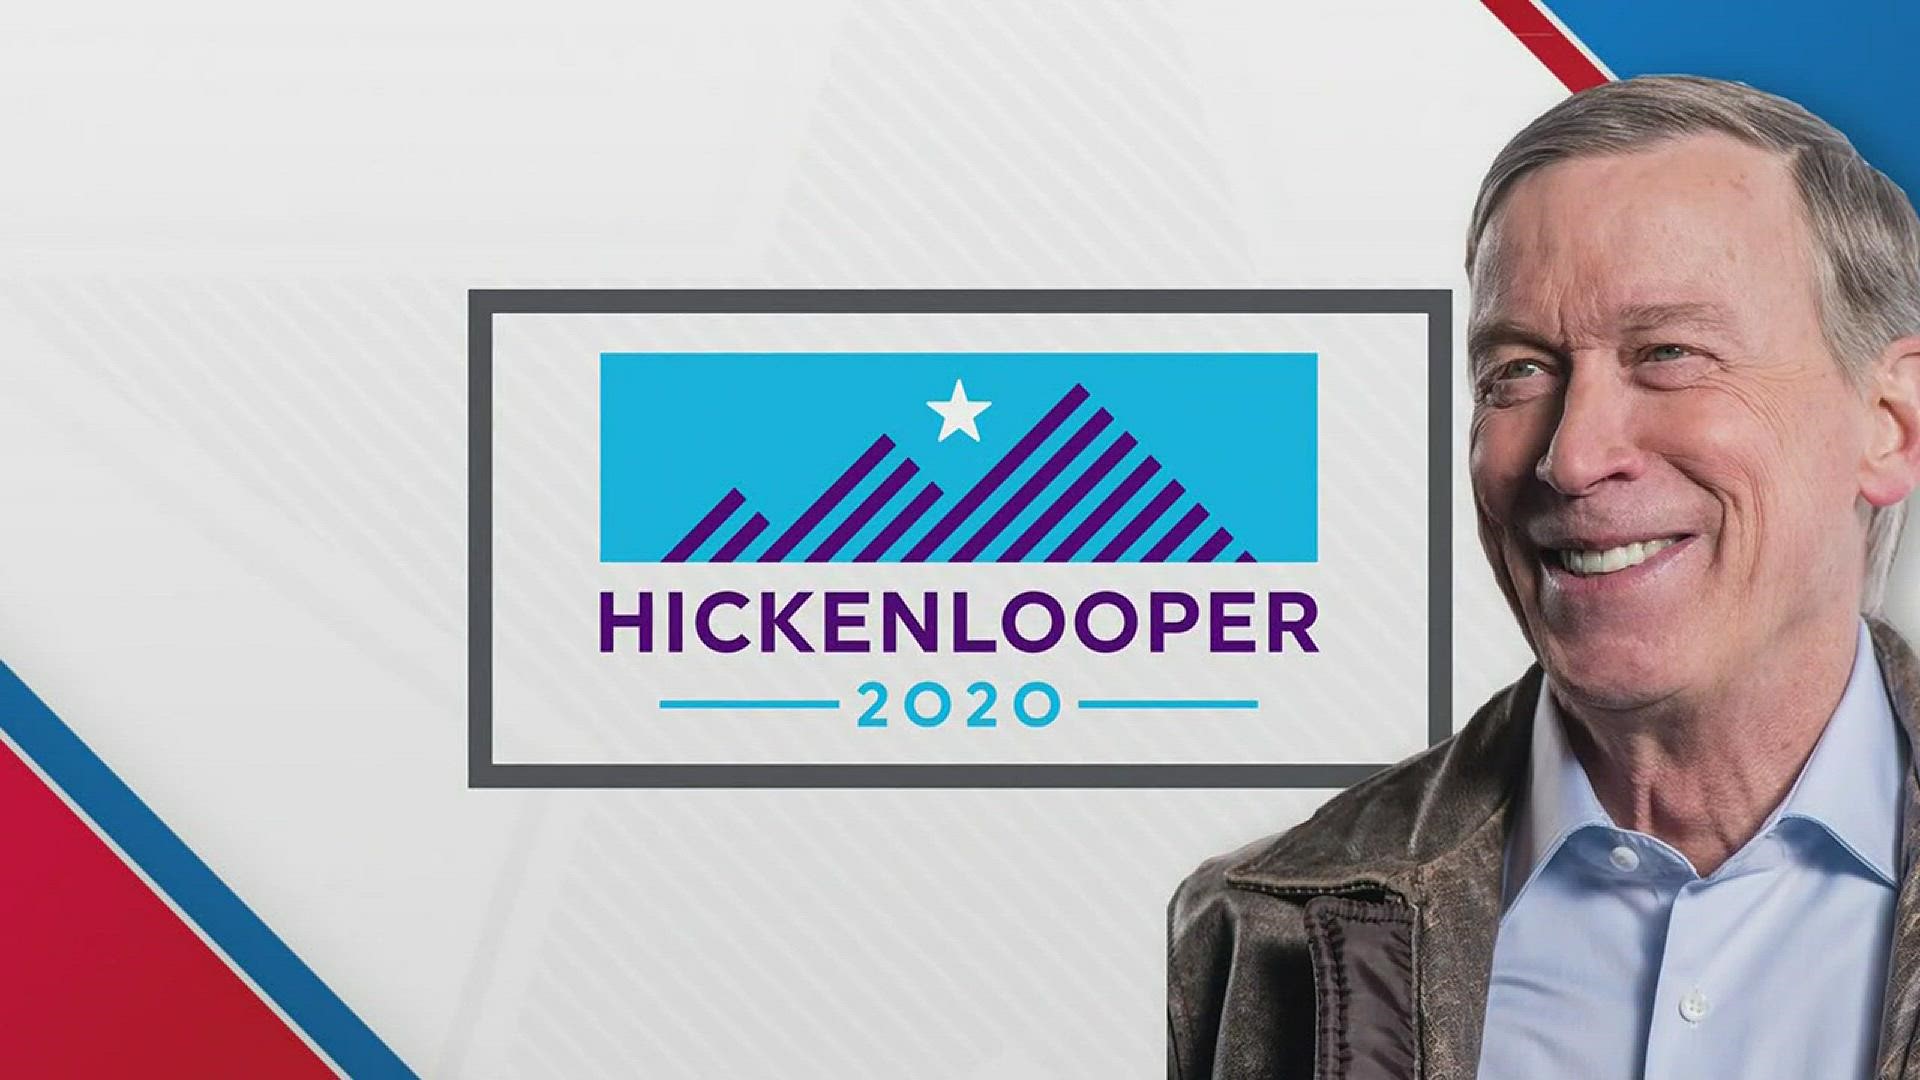 This week John Hickenlooper announced his presidential campaign. The 9NEWS political experts share their thoughts on his campaign.